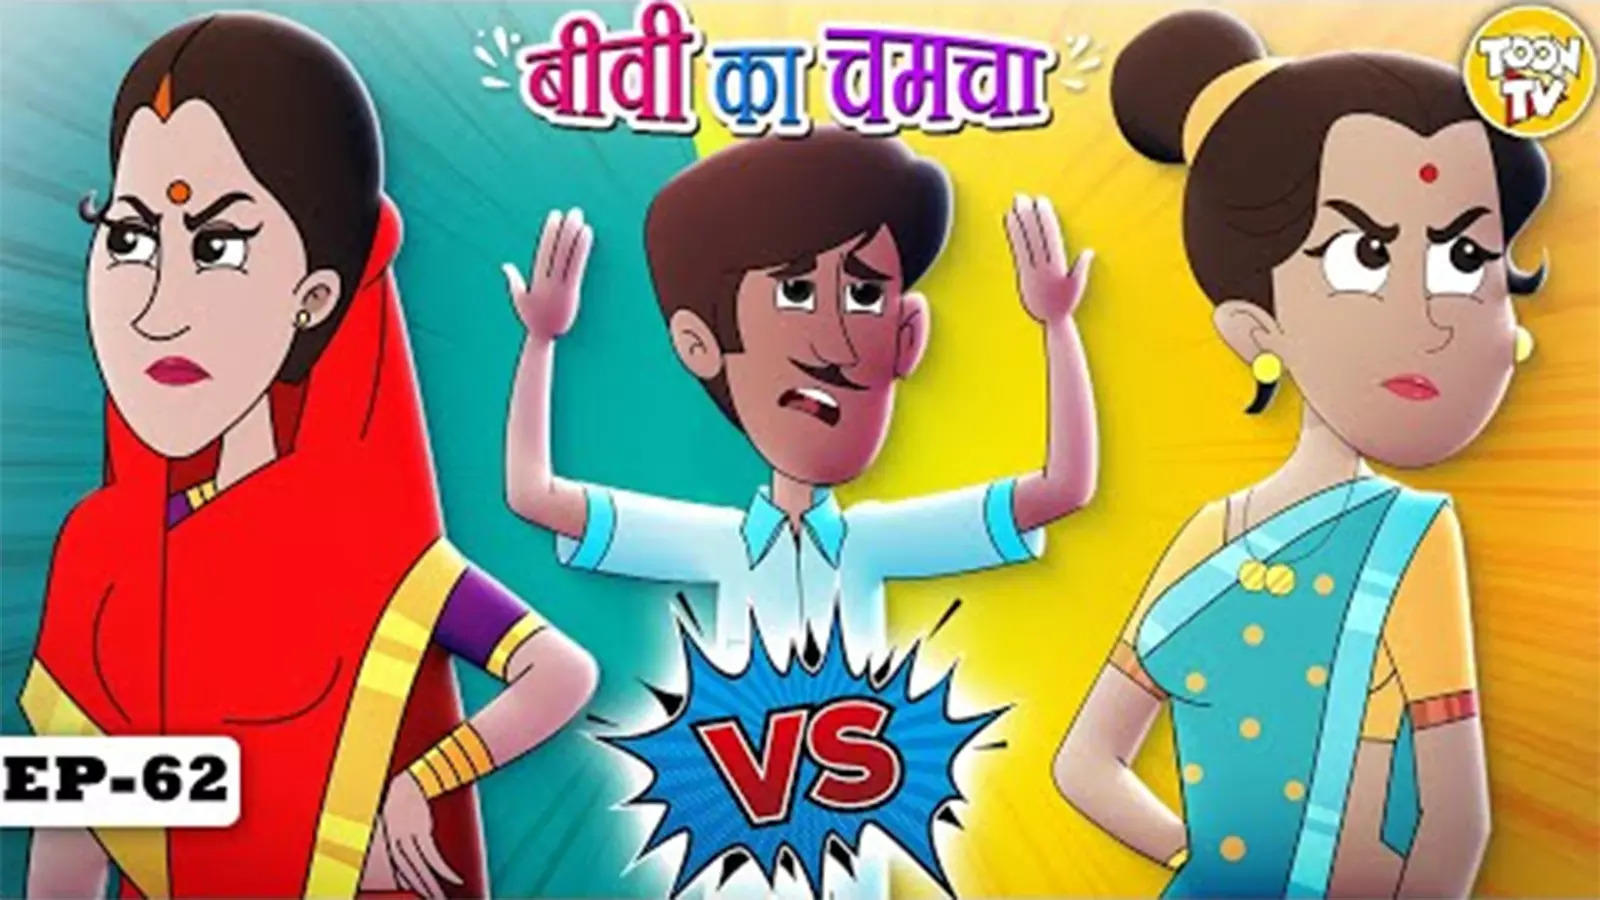 Watch Latest Children Hindi Story 'Biwi Ka Chamcha' For Kids - Check Out  Kids Nursery Rhymes And Baby Songs In Hindi | Entertainment - Times of  India Videos